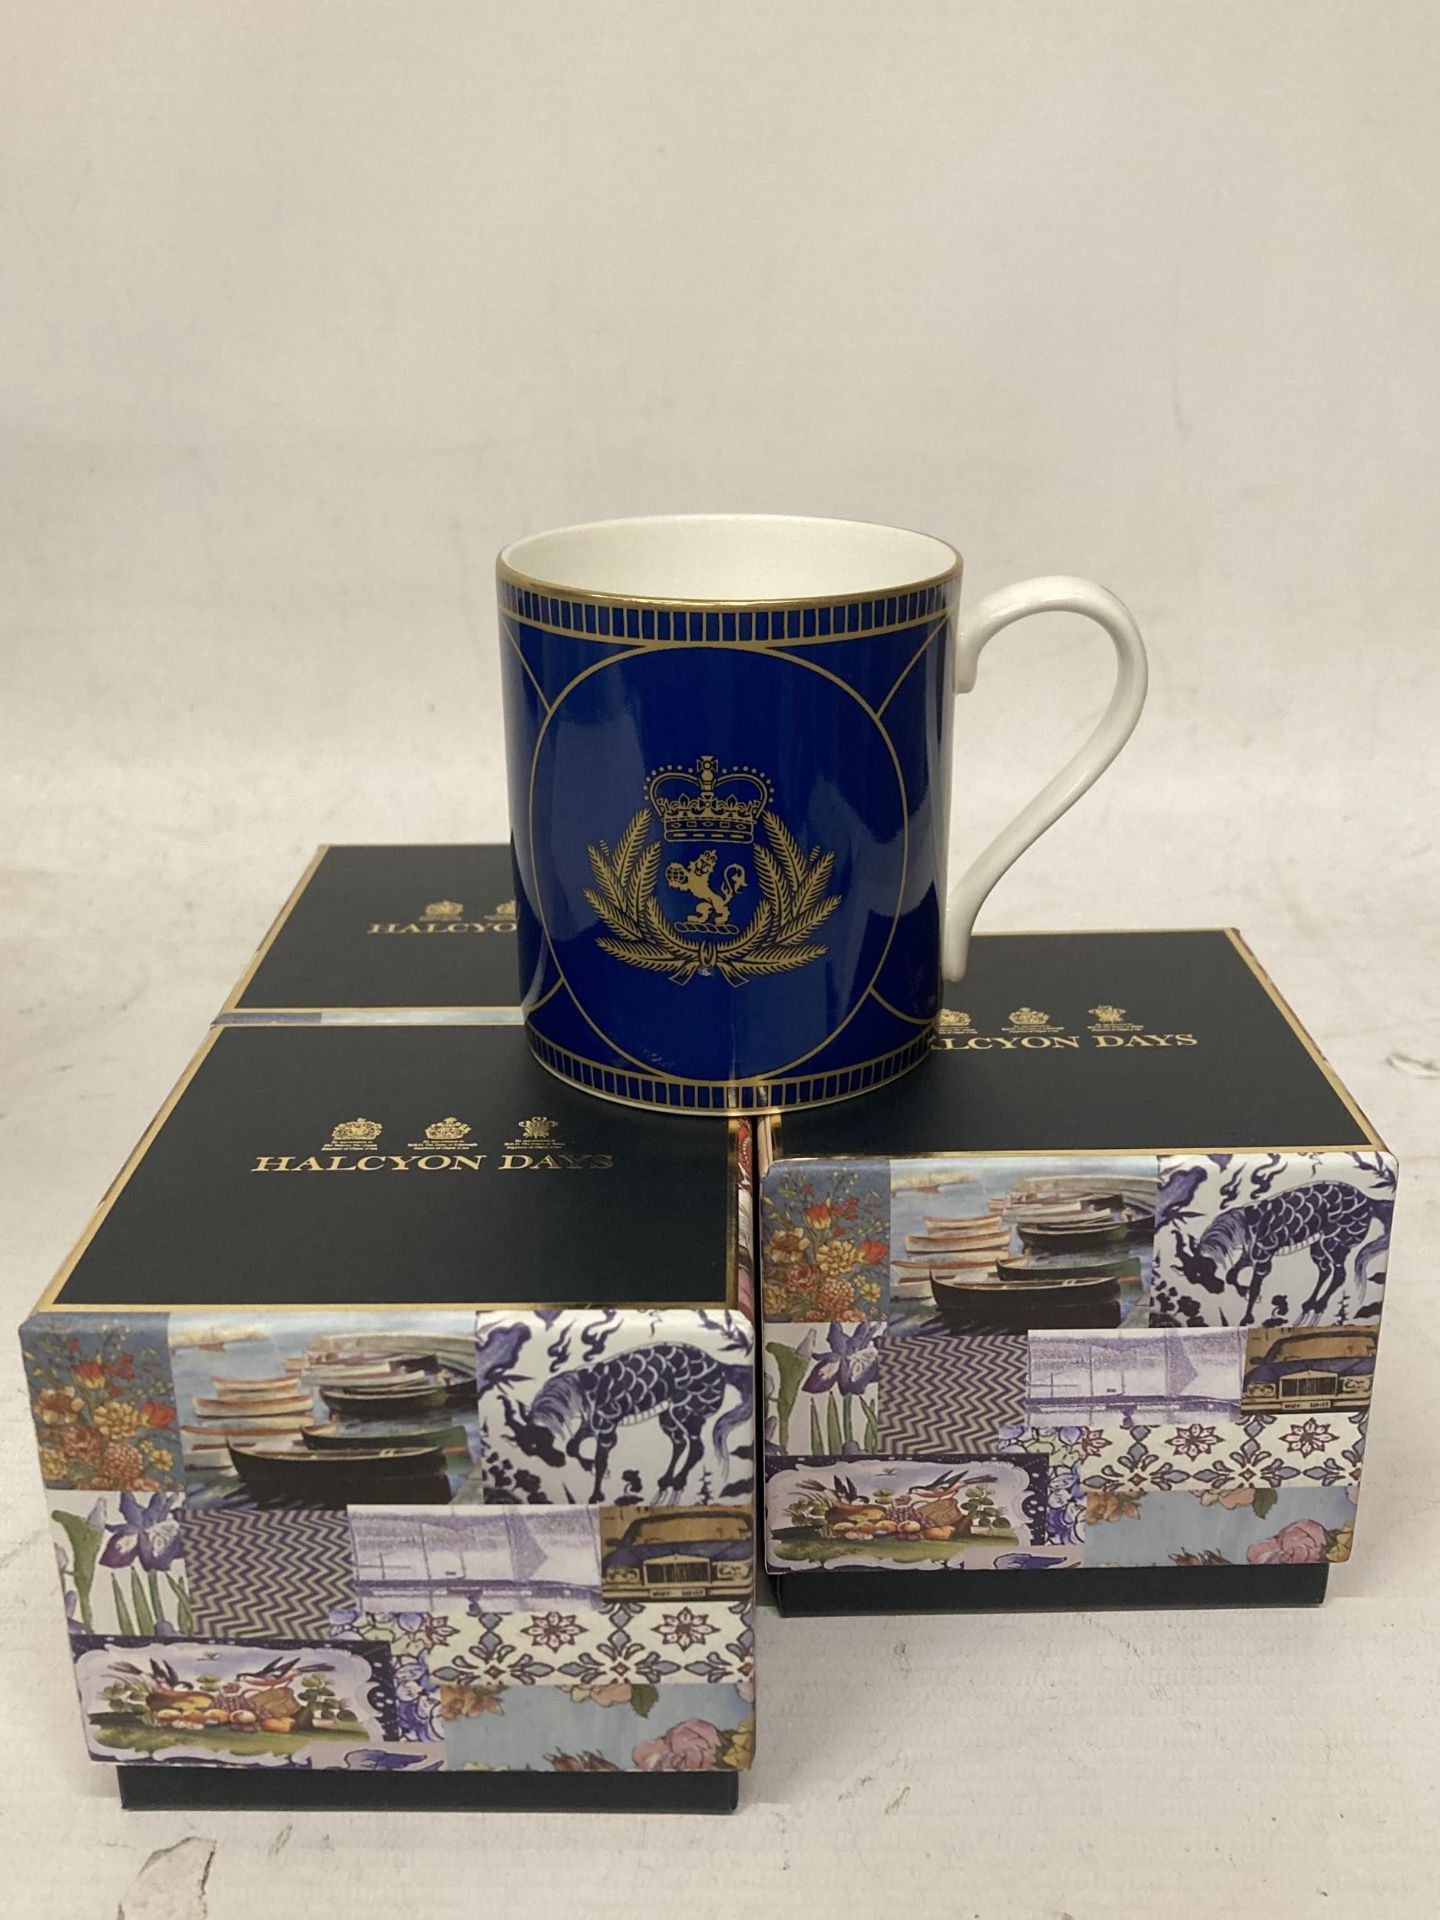 THREE NEW AND BOXED HALCYON DAYS MUGS MADE FOR CUNARD